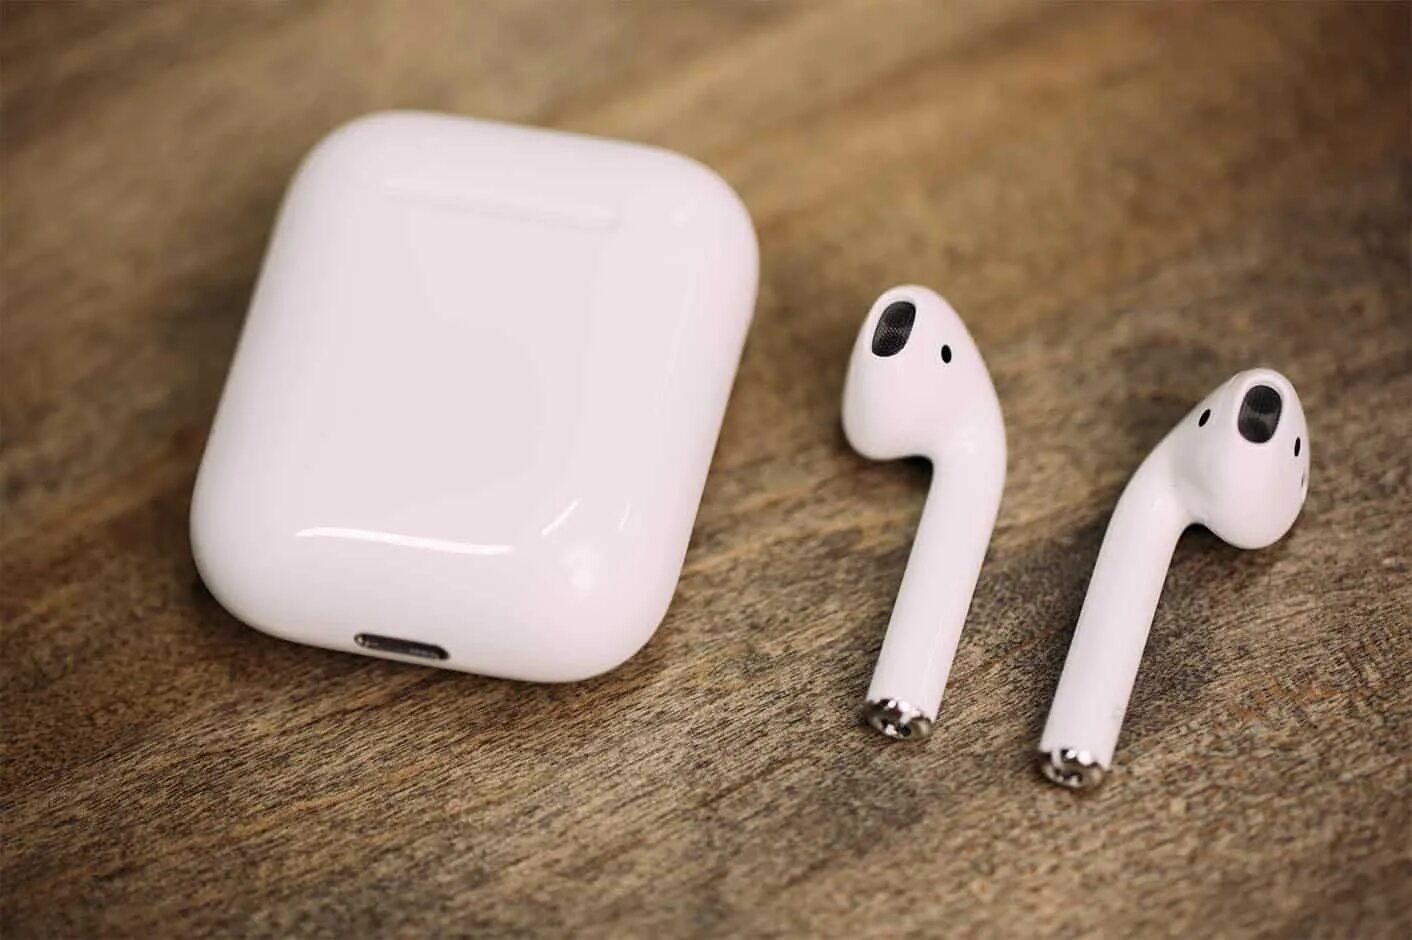 Airpods уфа. Apple AIRPODS 2. Наушники Apple аирподс про 2. Apple AIRPODS 1. Наушники айфон аирподс.